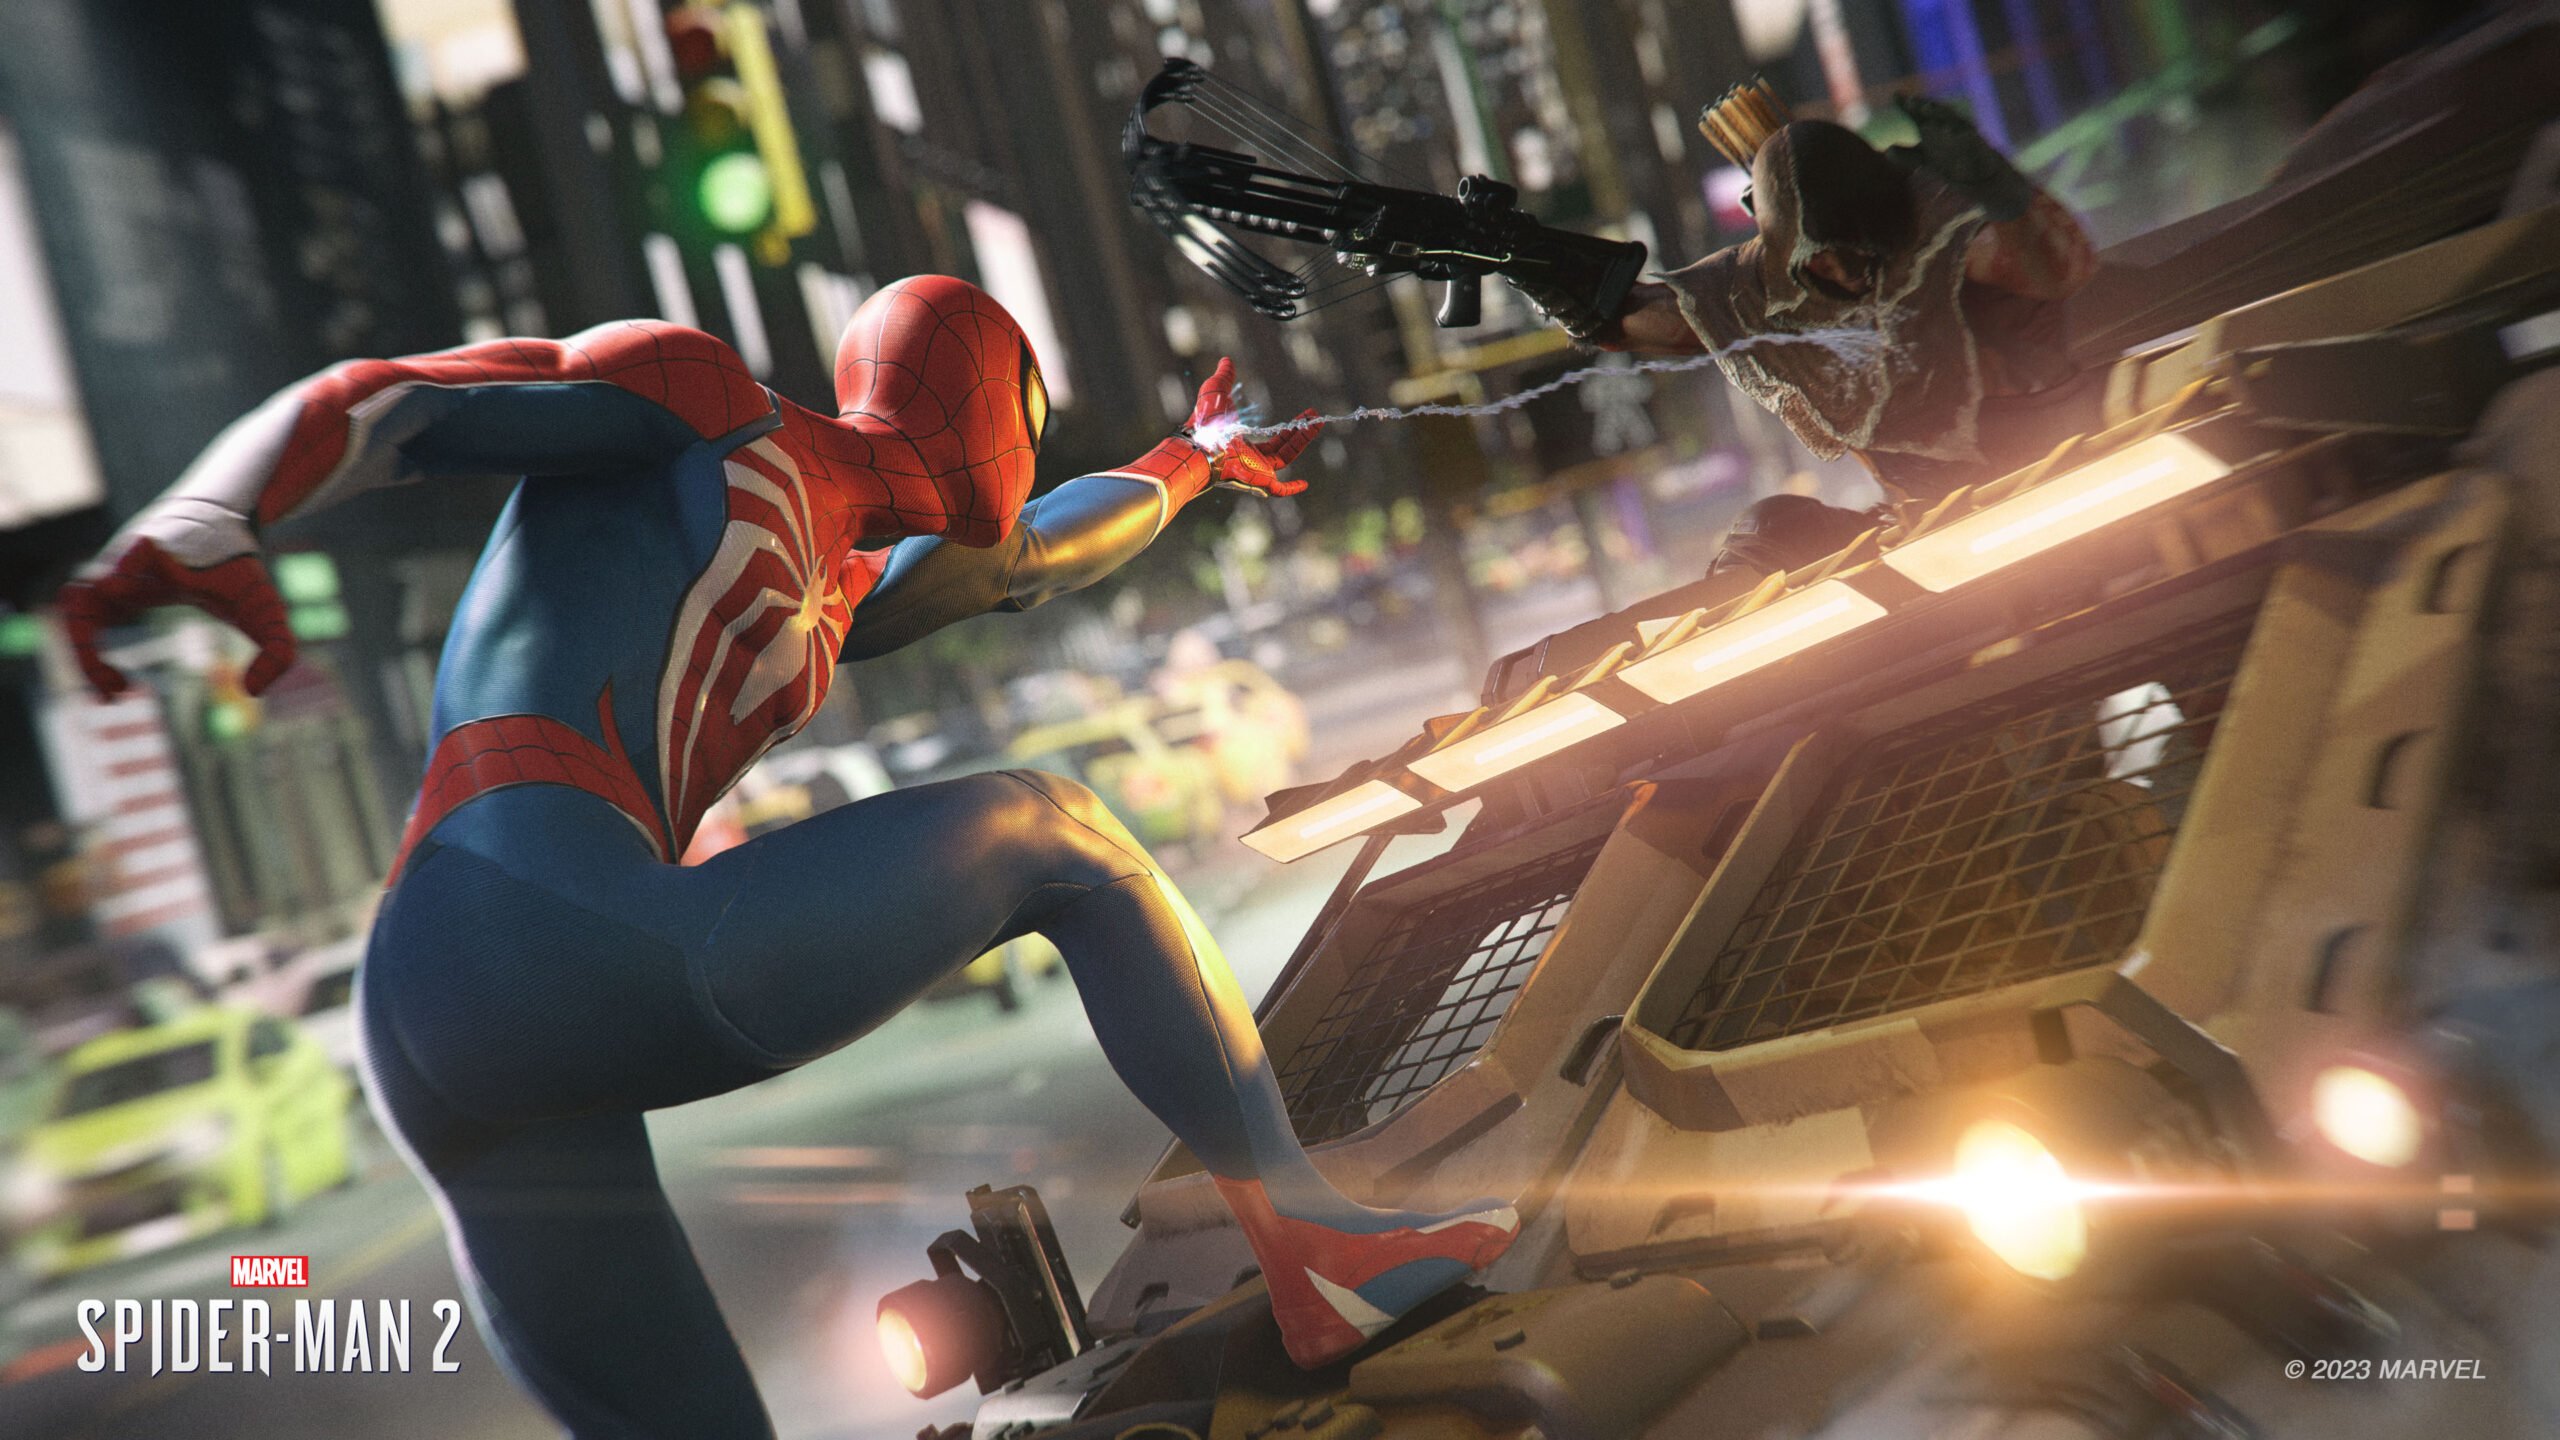 Spider-Man actor thinks Insomniac isn’t done with Peter Parker